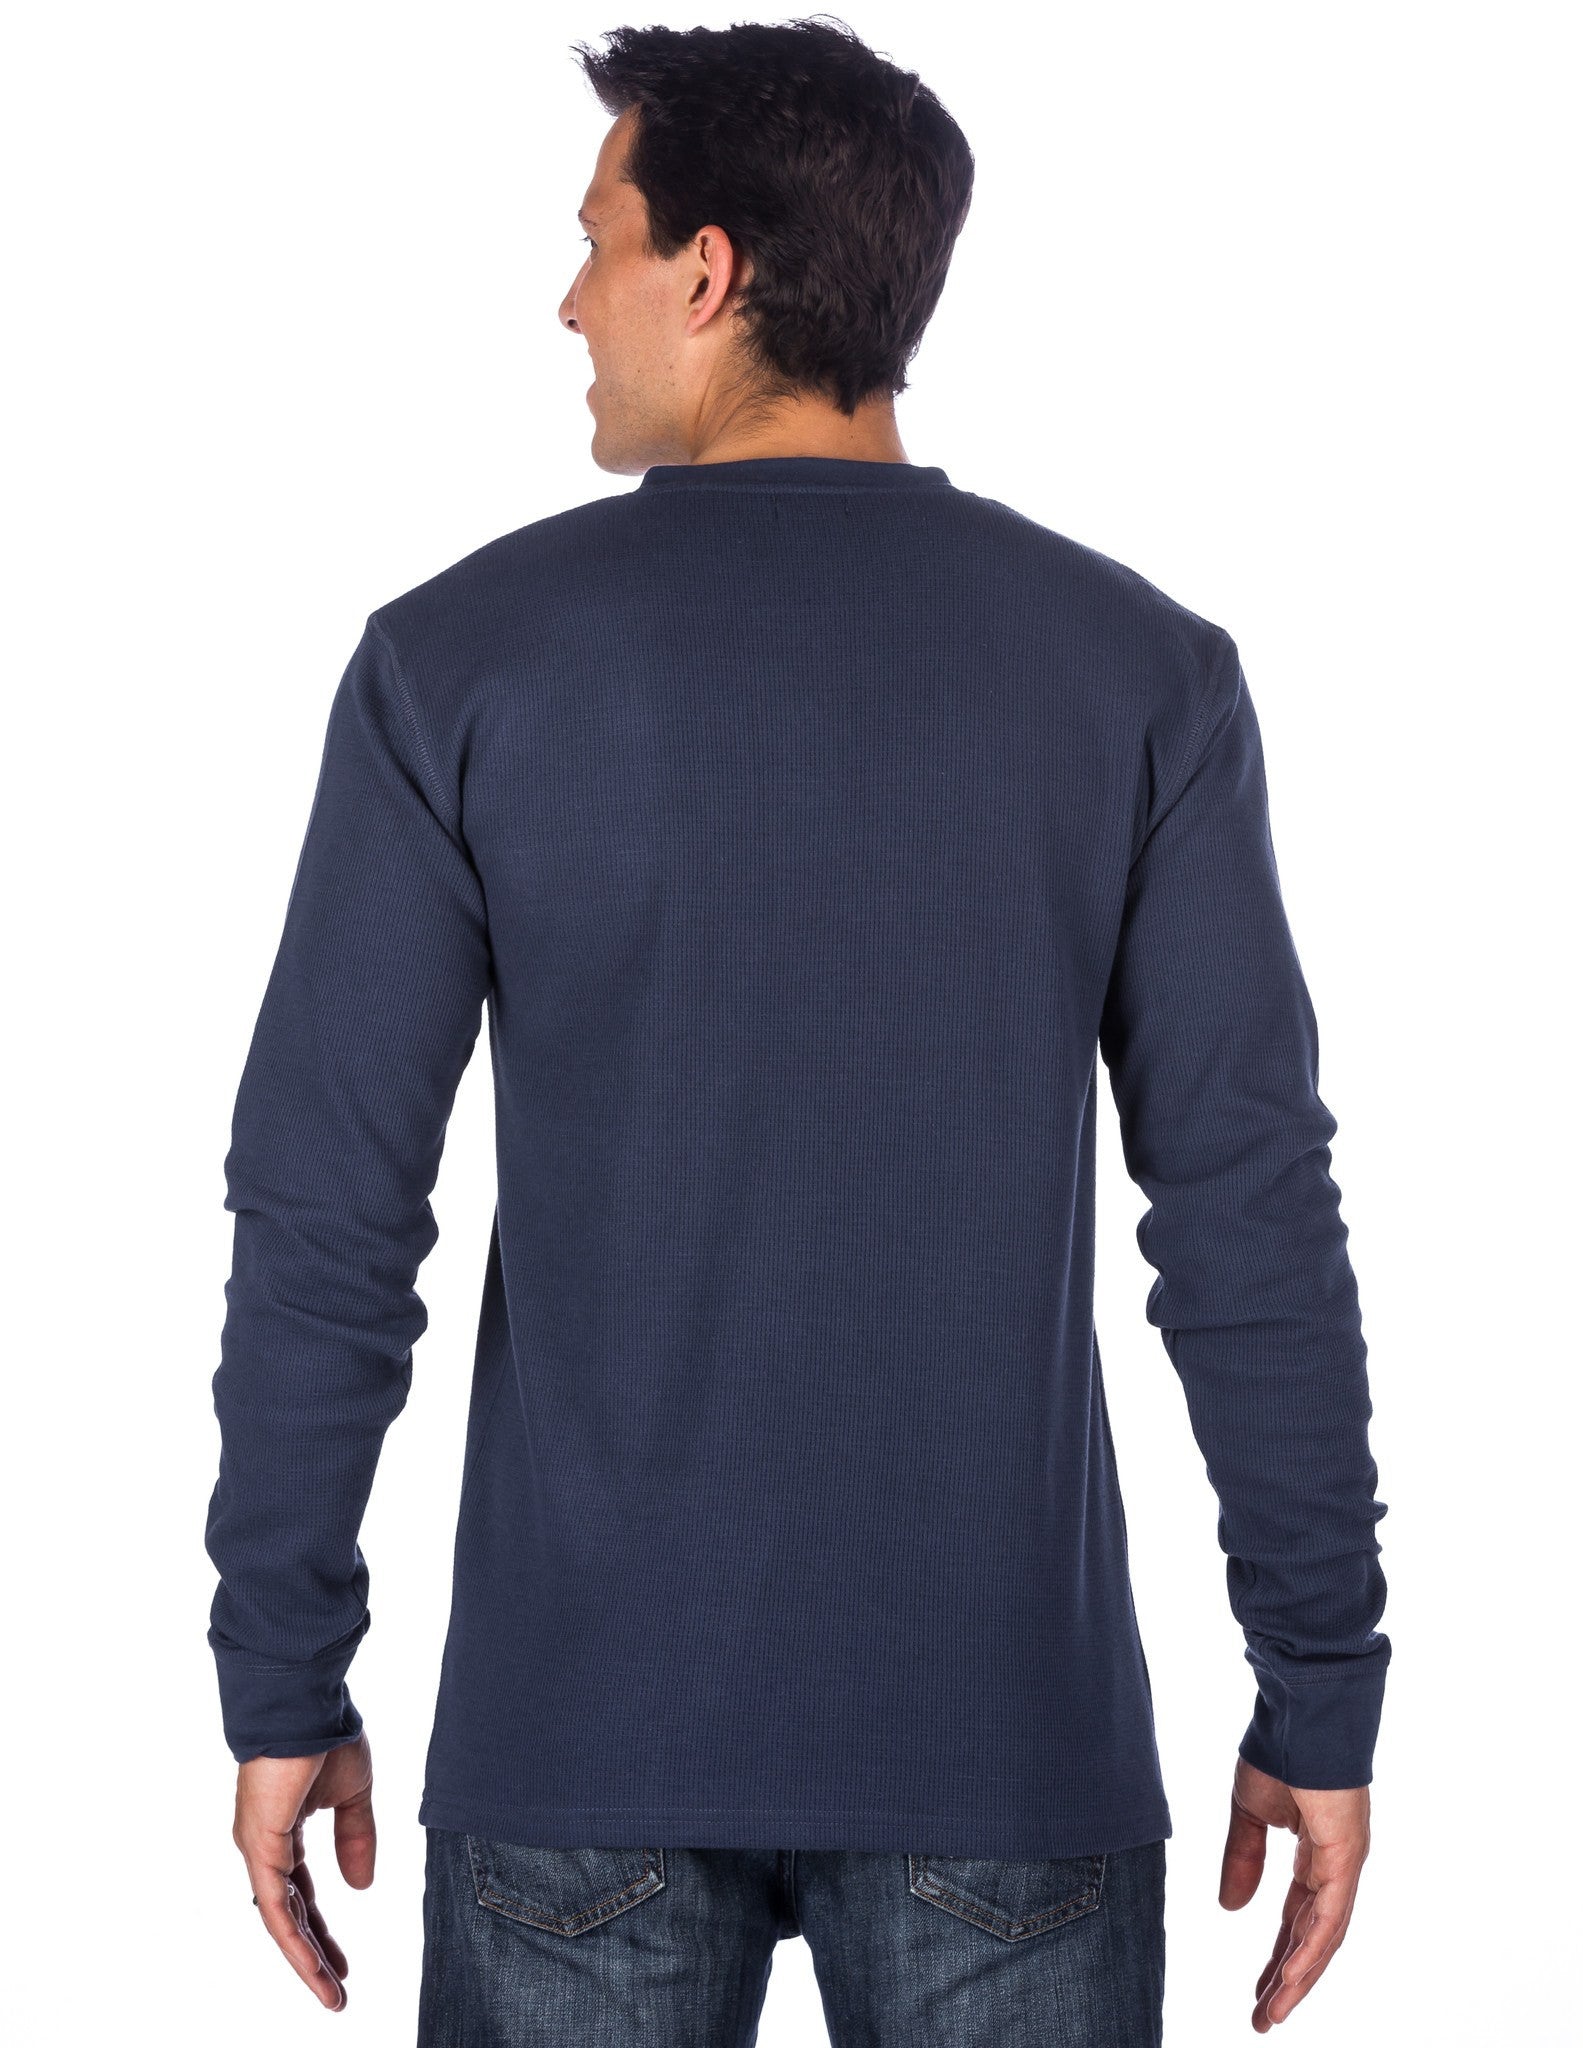 Noble Mount Men's Thermal Henley Long Sleeve Shirts